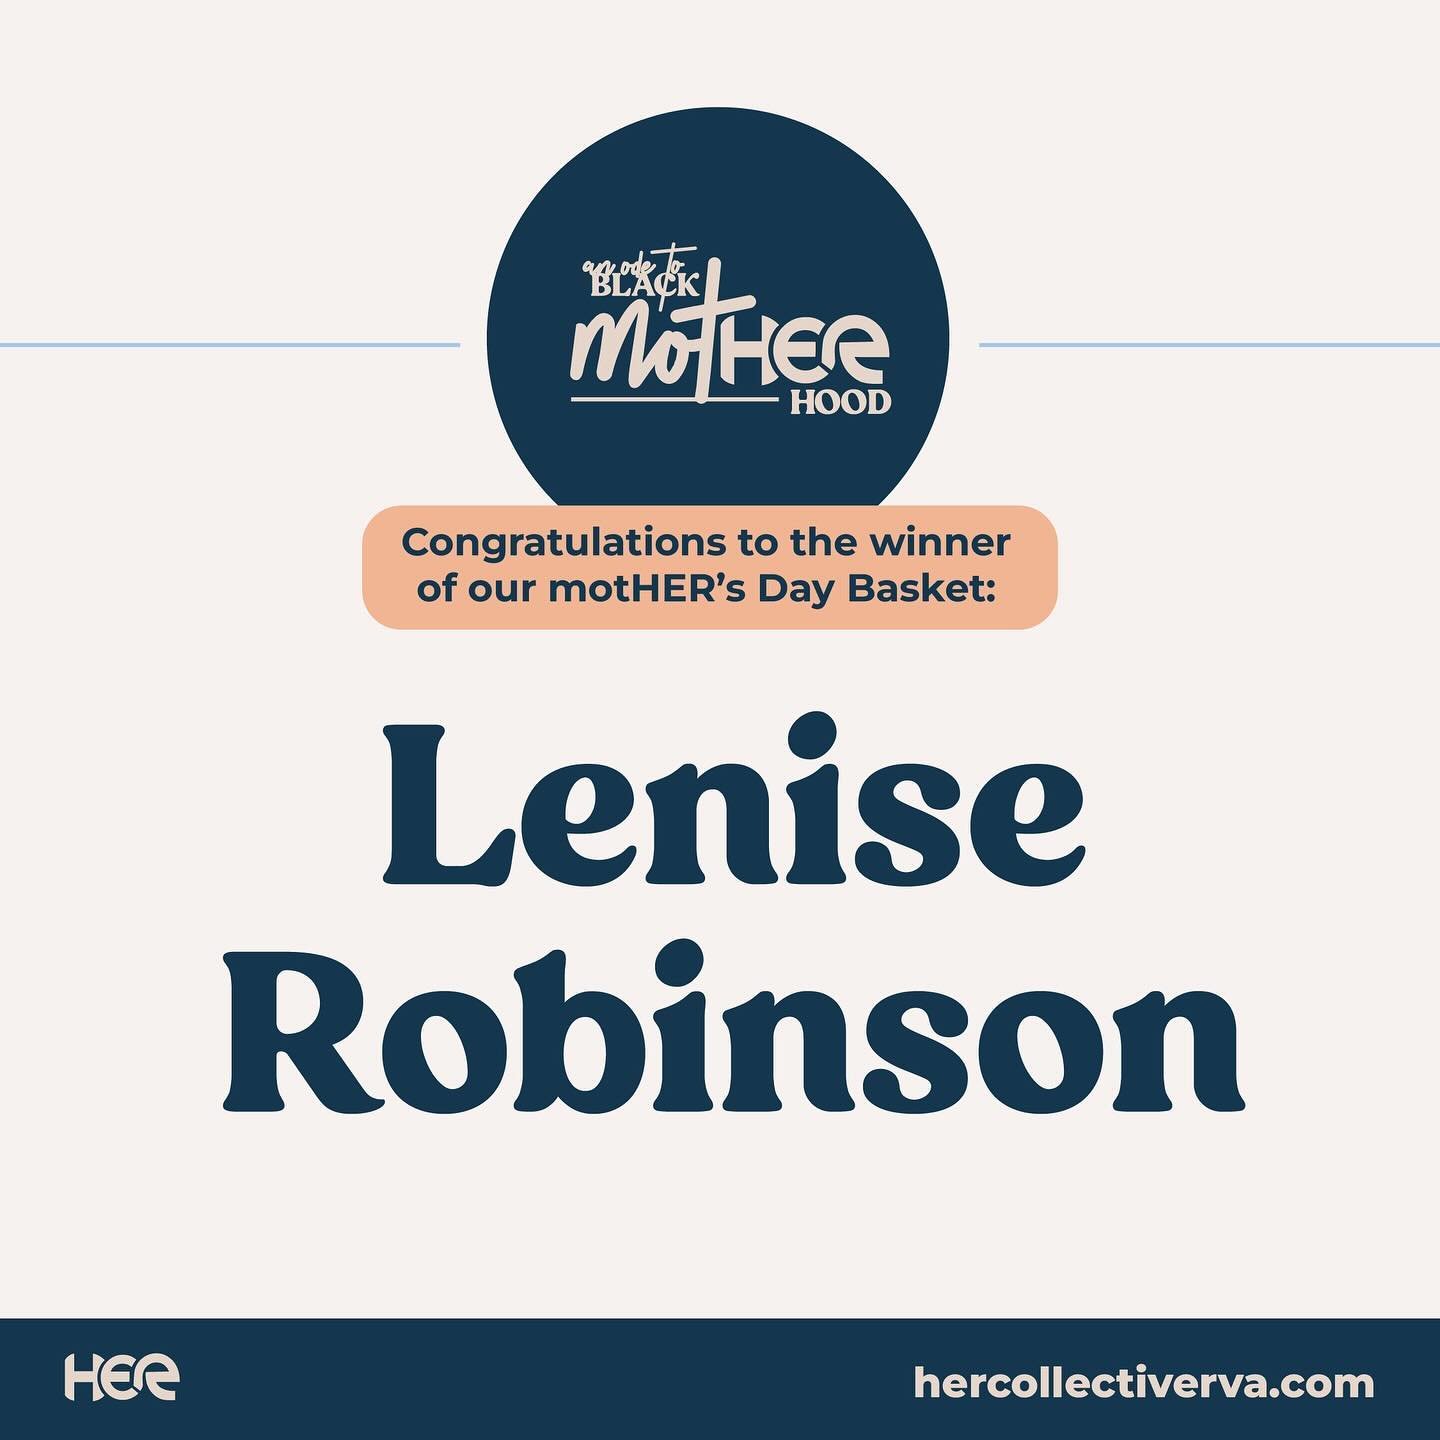 🎉Congratulations to Lenise Robinson, the winner of our MotHER's Day basket! 🎉 We're excited to announce that Lenise was randomly selected from the incredible group of women who shared their personal stories for our digital campaign, &quot;An Ode to